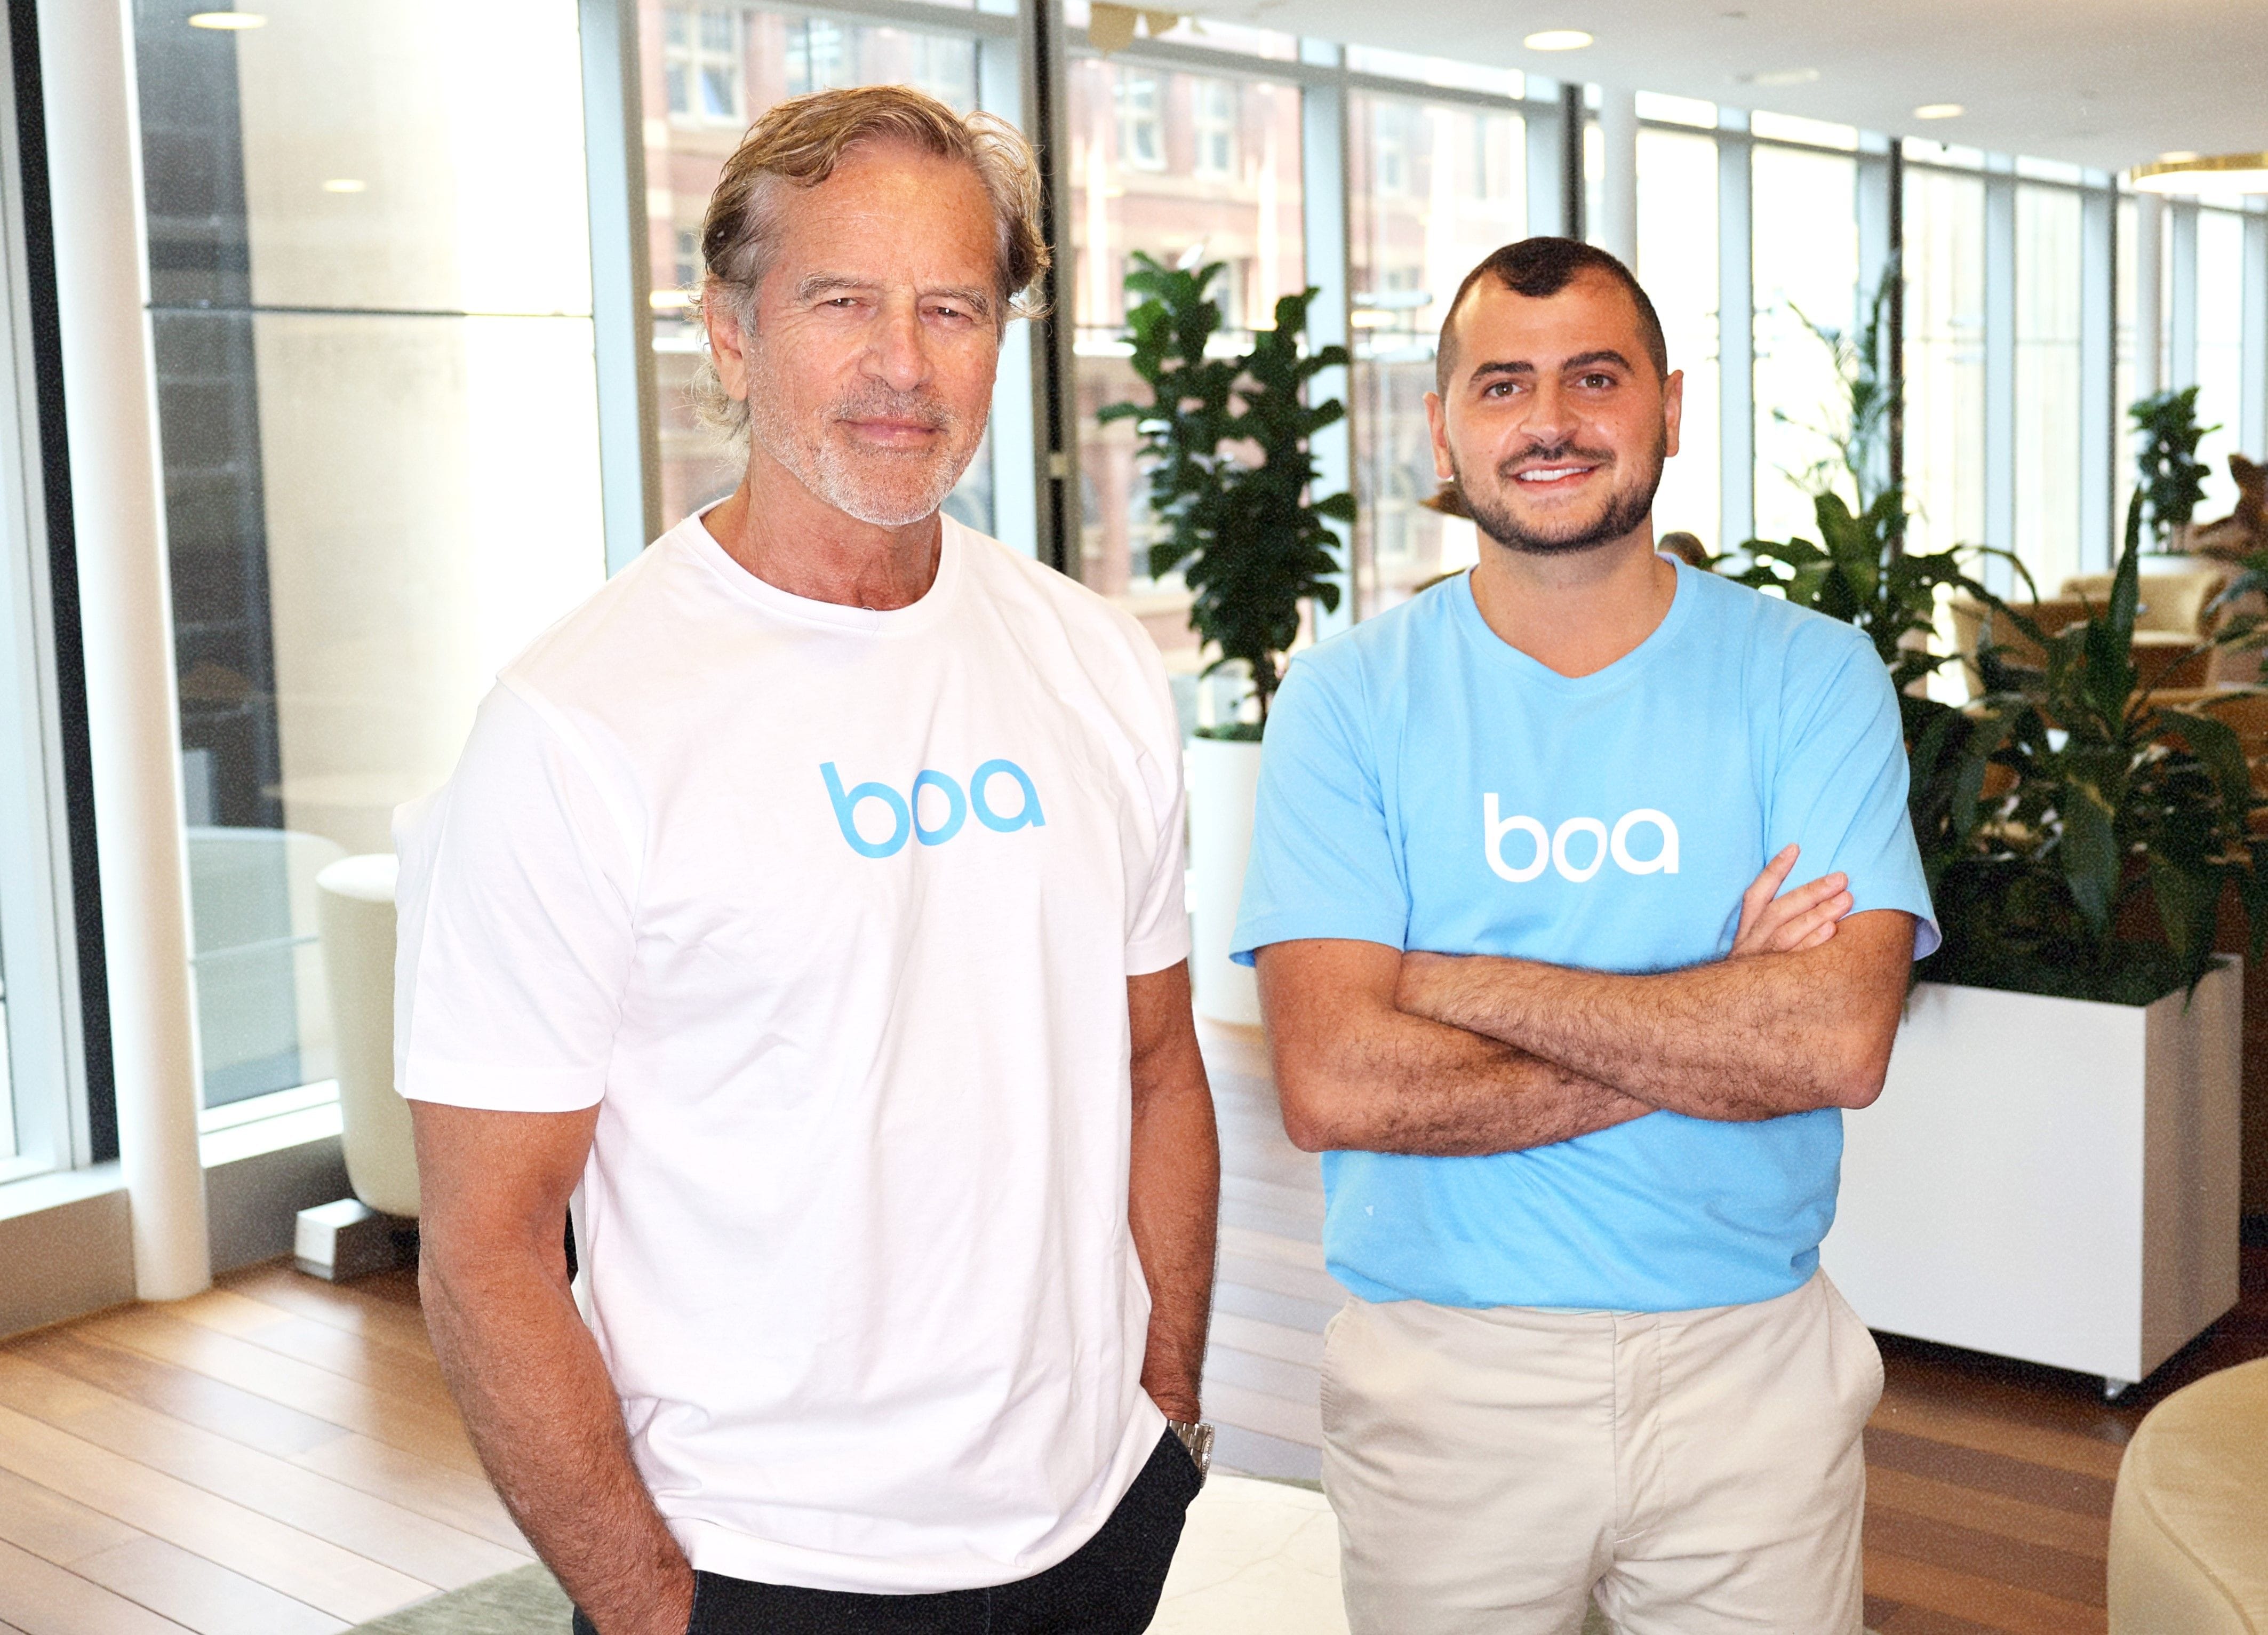 Going behind the façade of success: Bouris-backed Boa network aims to make it real for businesses